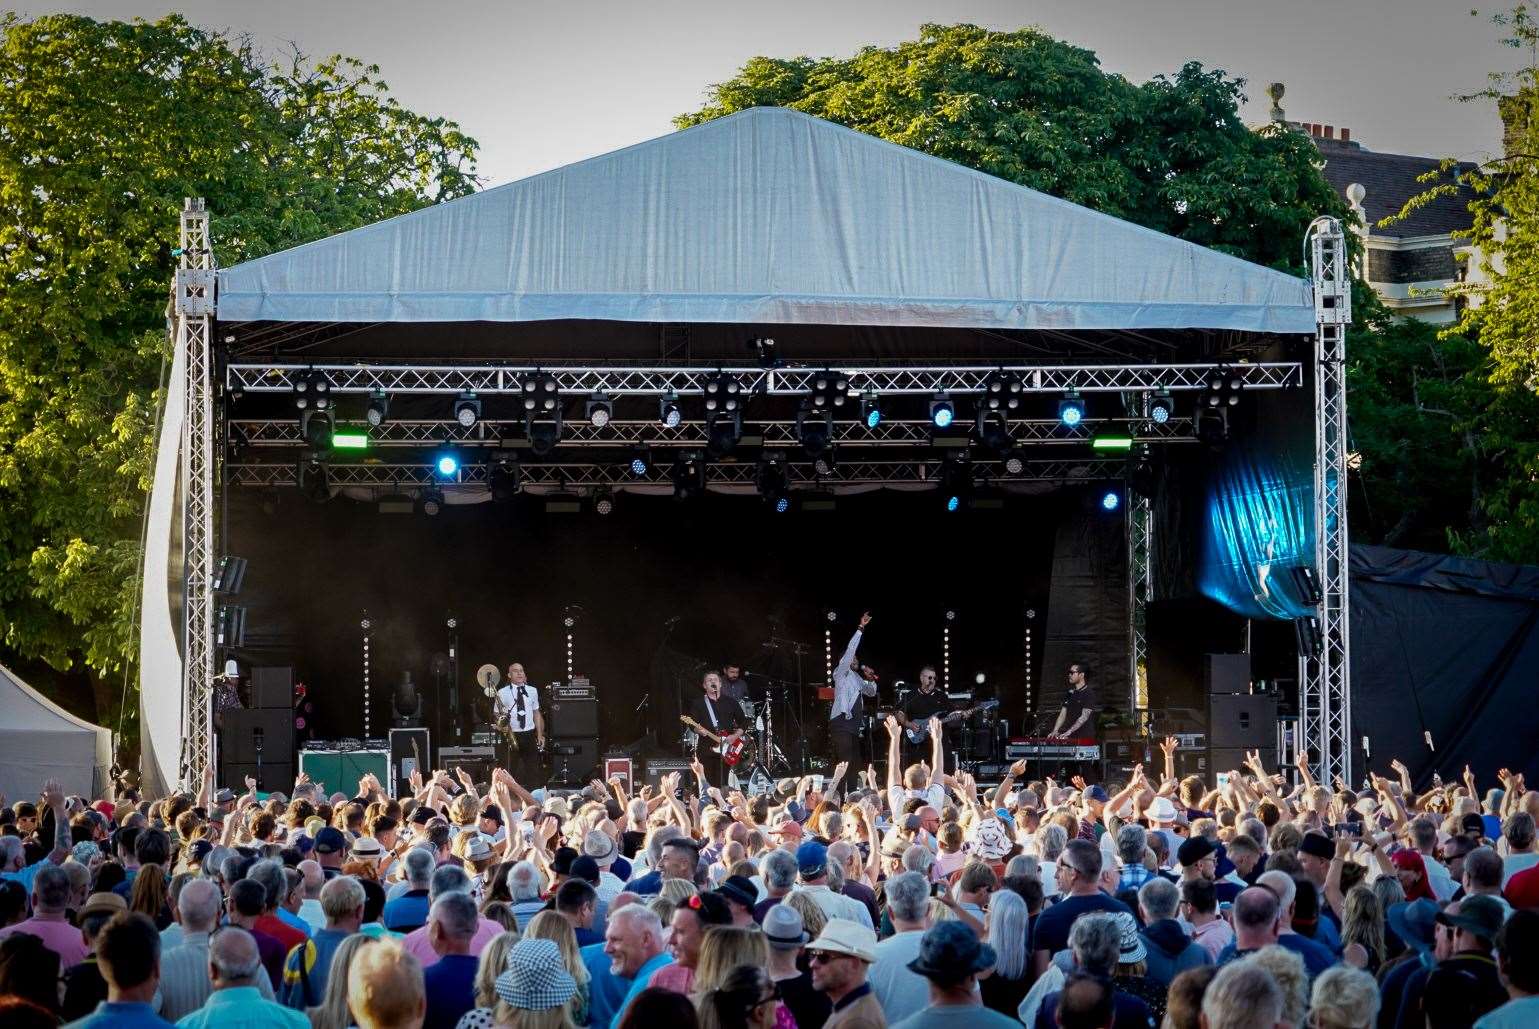 Last year's Rochester Castle Concerts saw performances from The Specials, The Beat, the Human League and more. Picture: Pete Willson